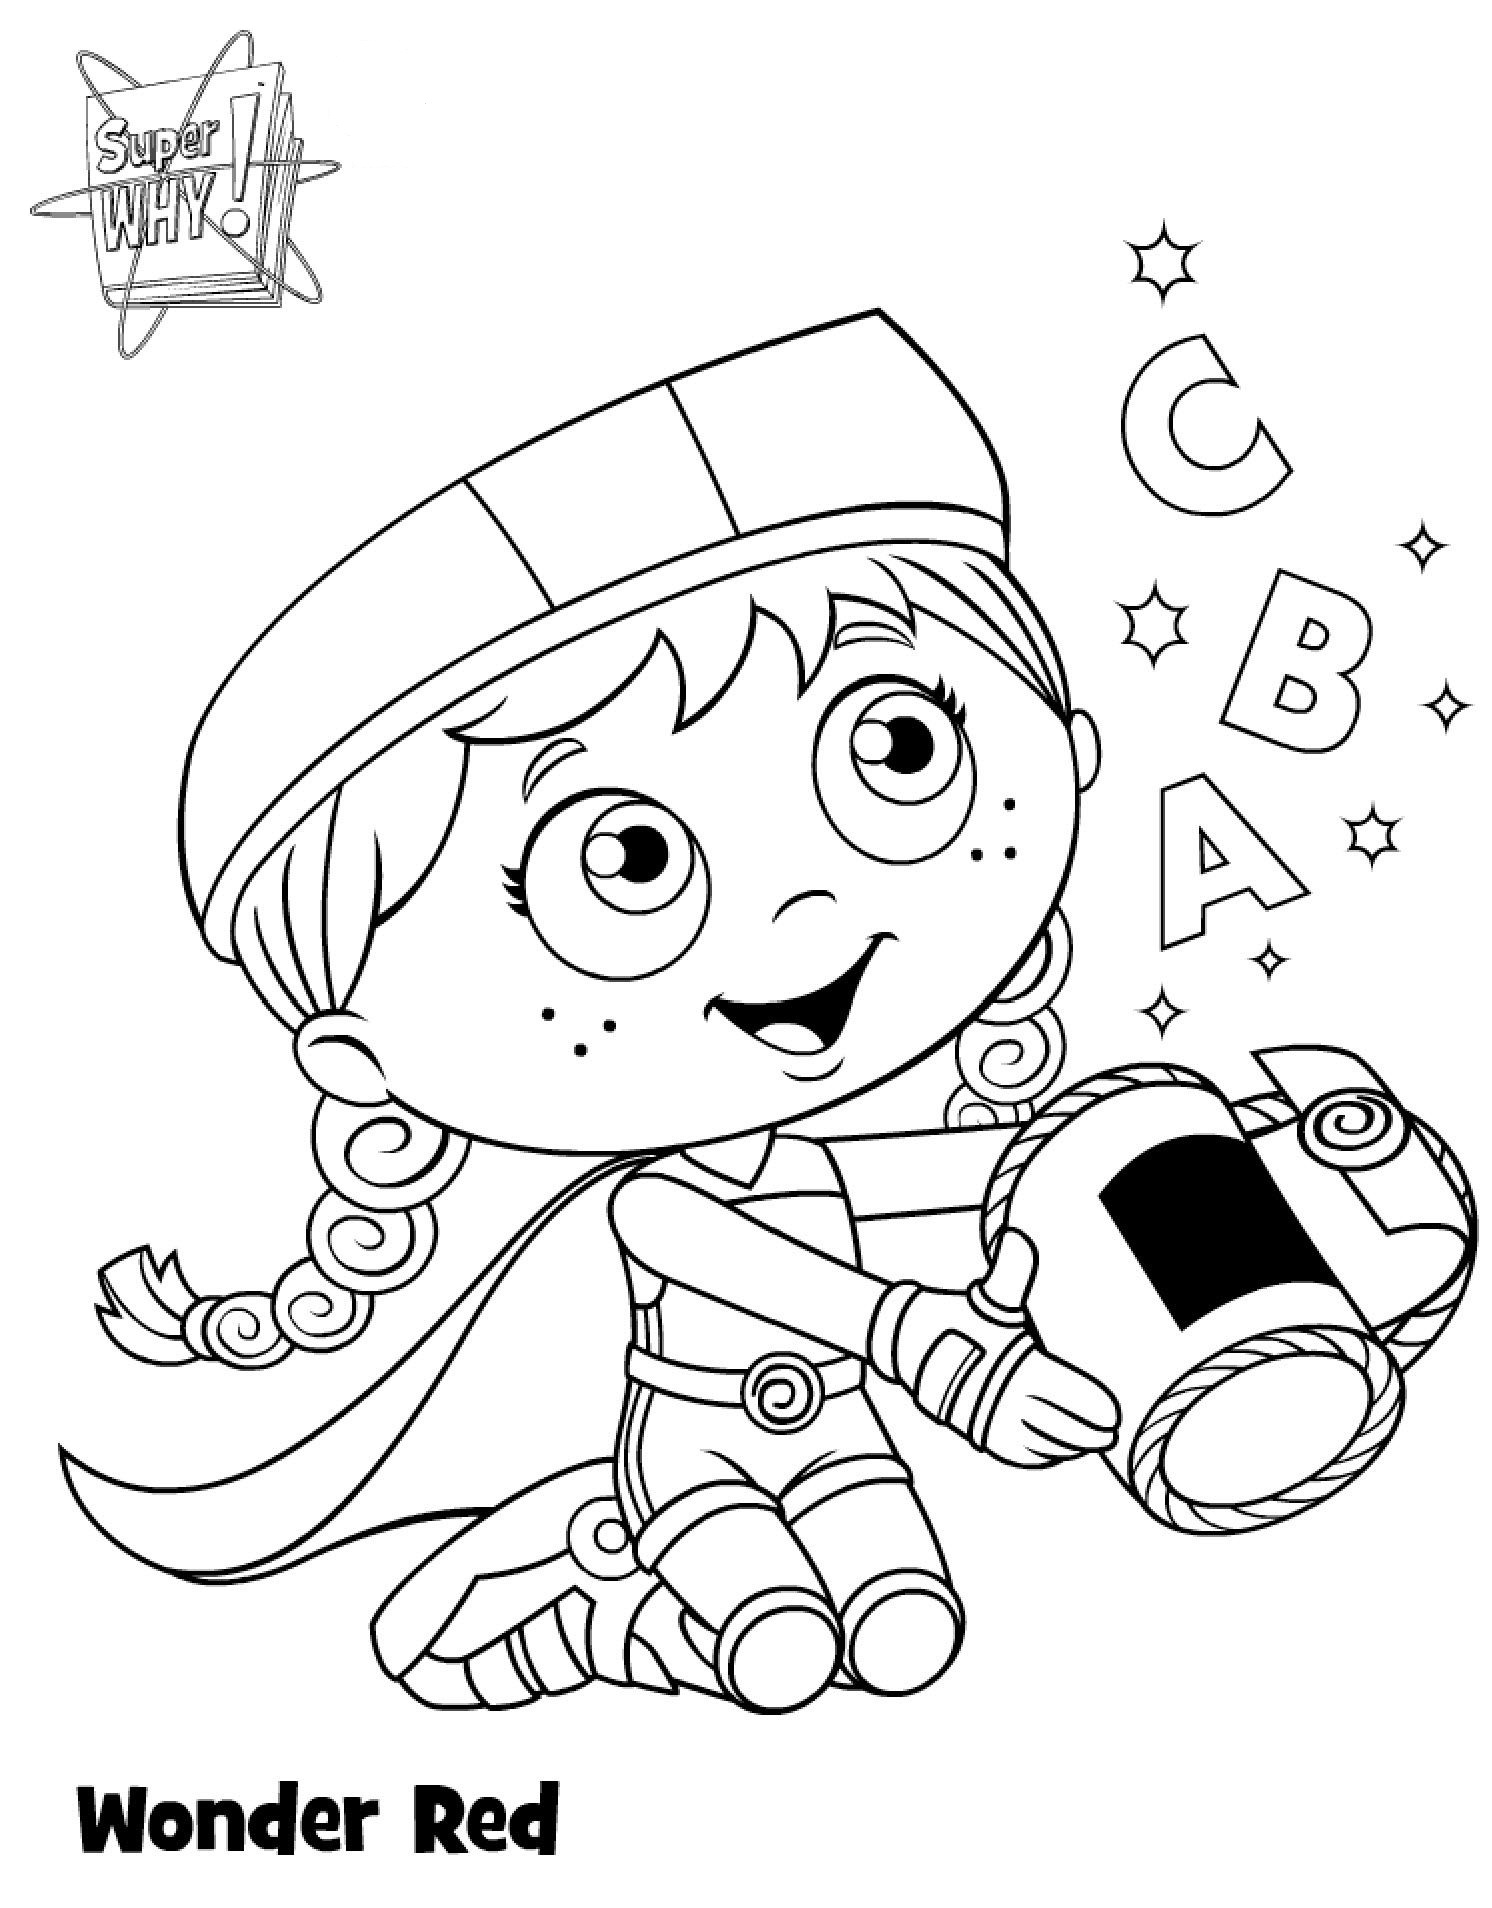 super why well coloring pages